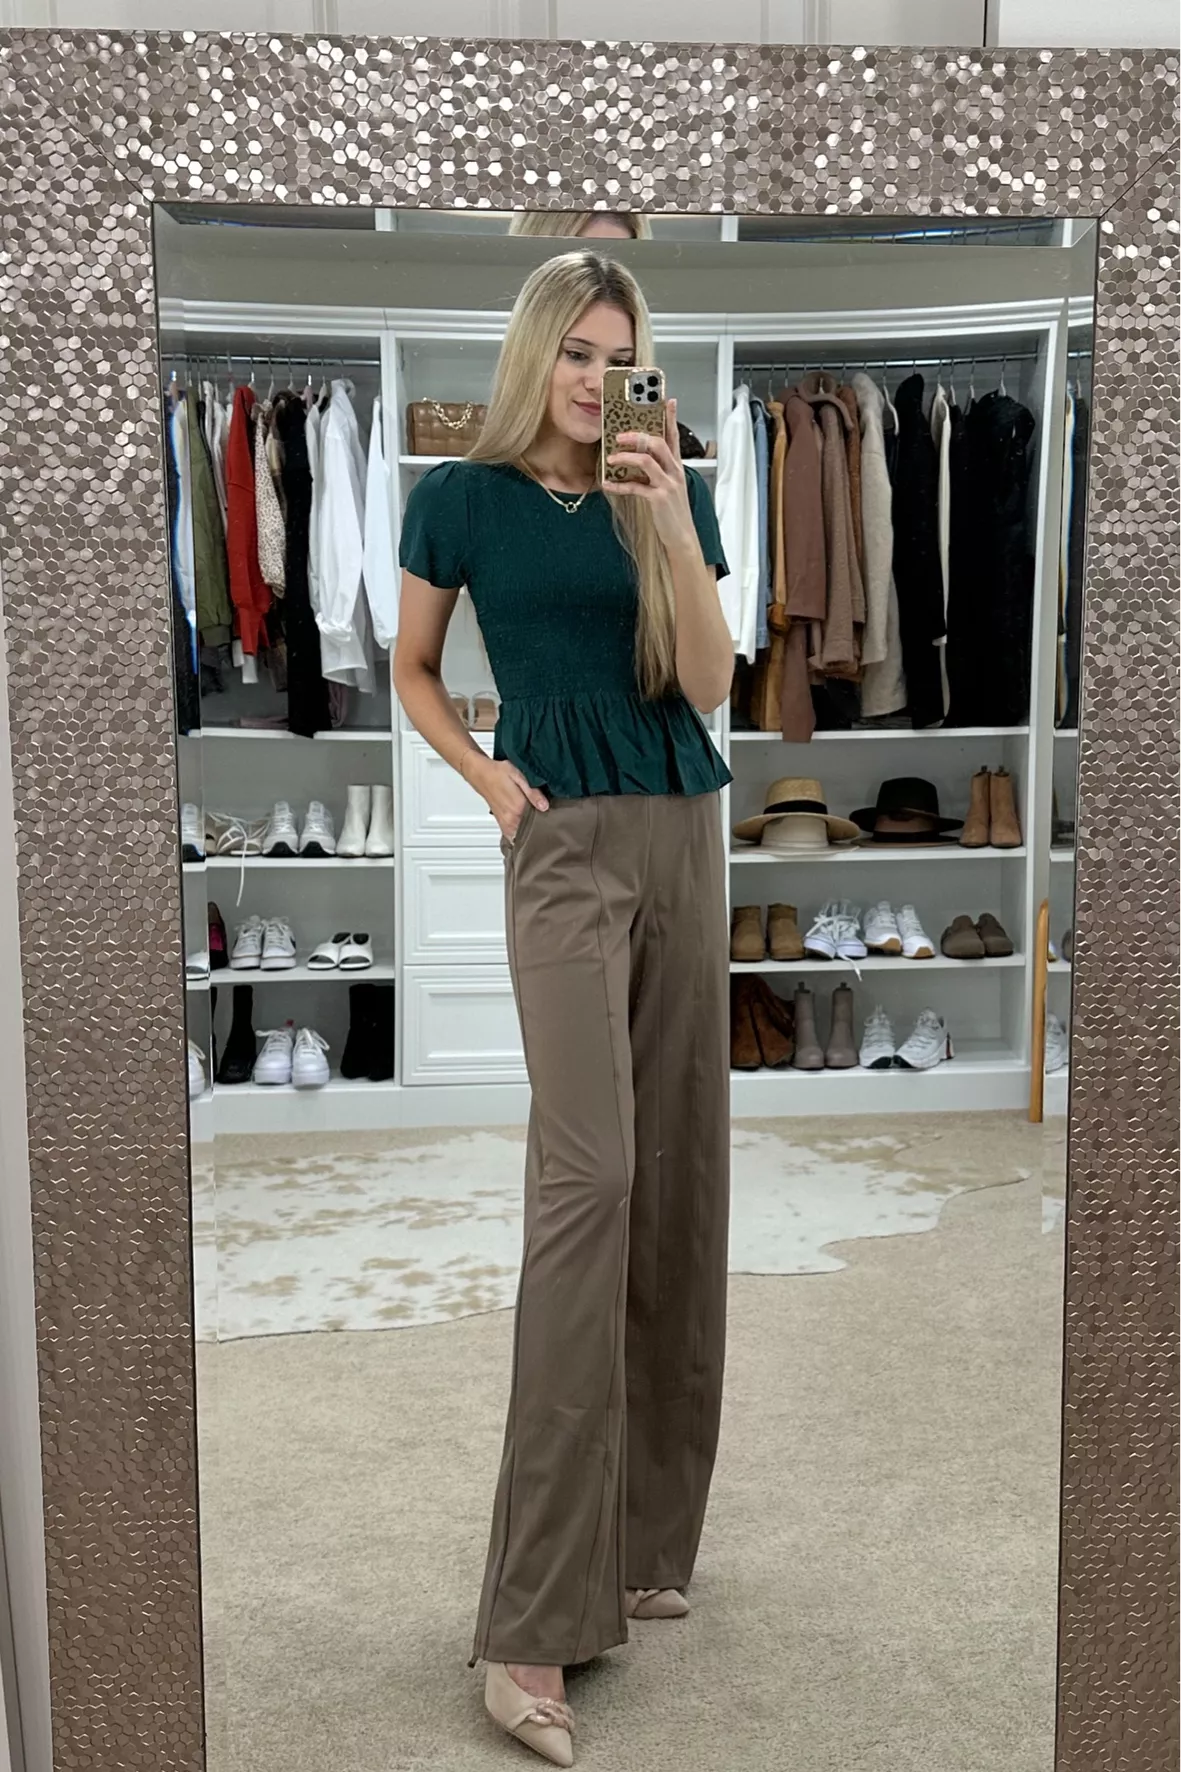 Peplum Top with Flare Pants Outfits (2 ideas & outfits)